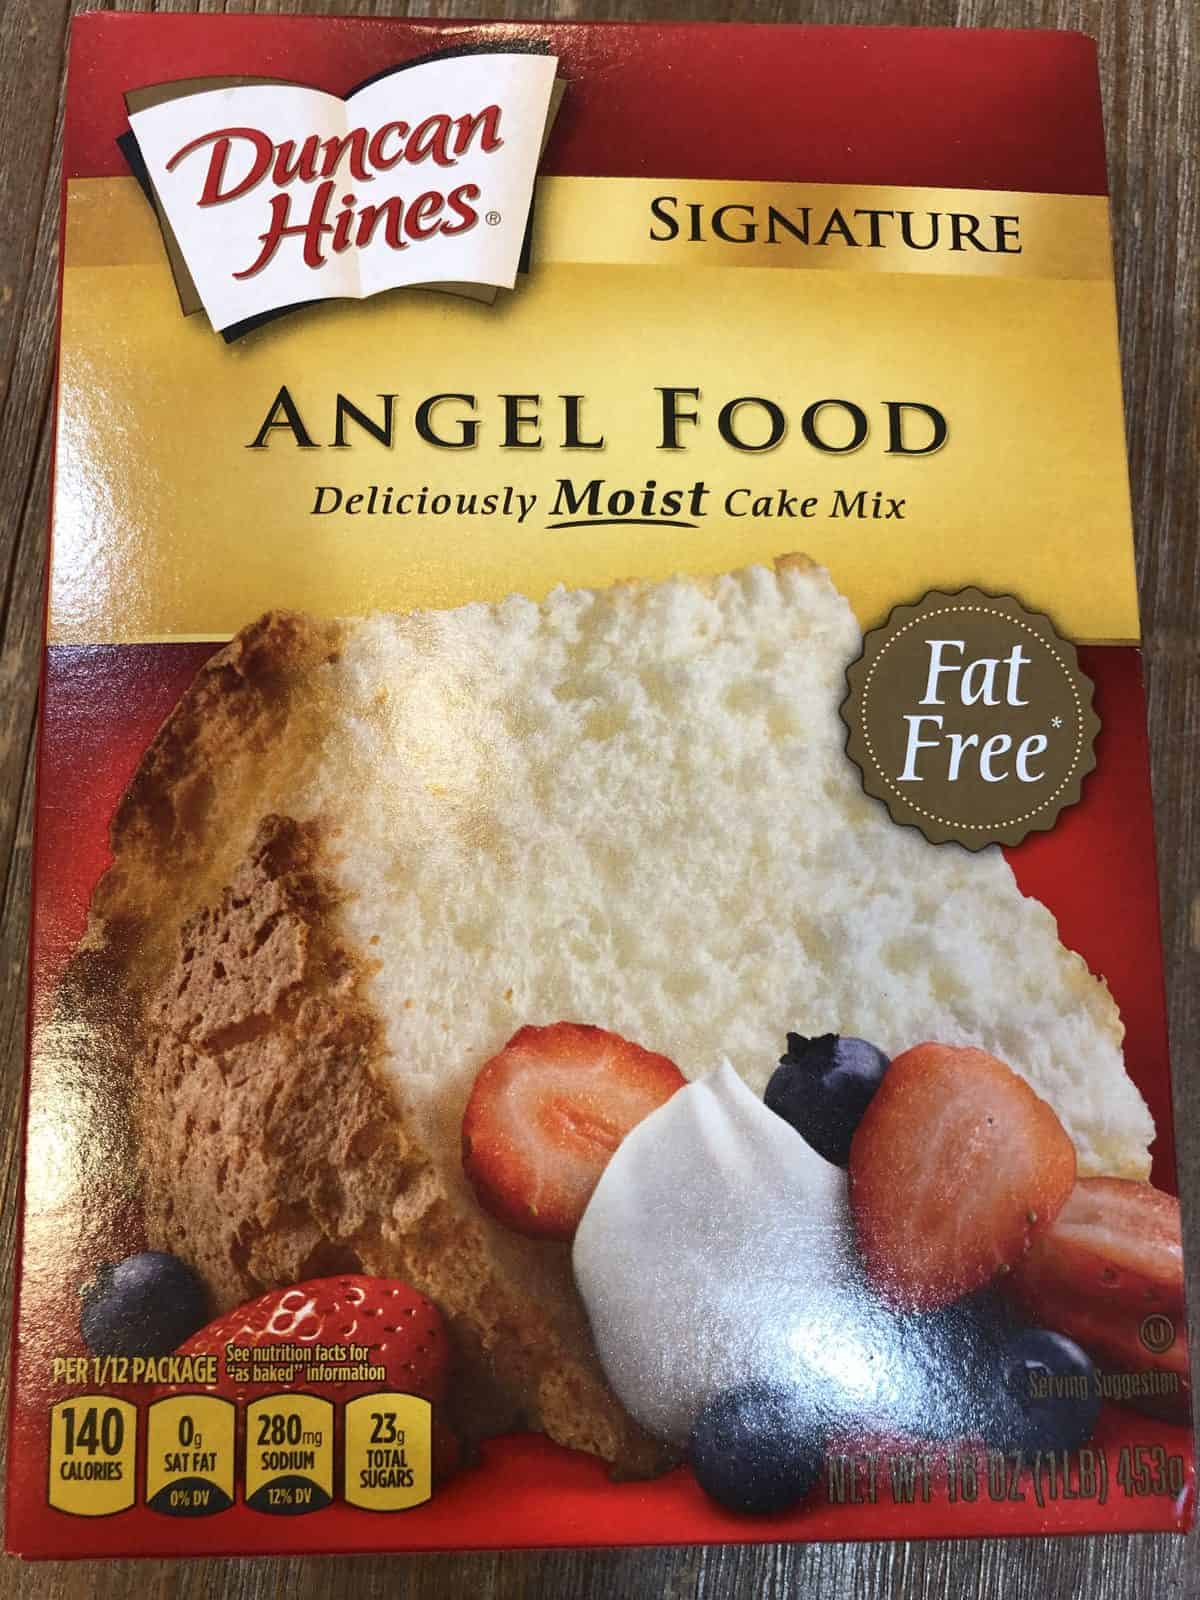 A box of Duncan Hines Angel Food Cake Mix